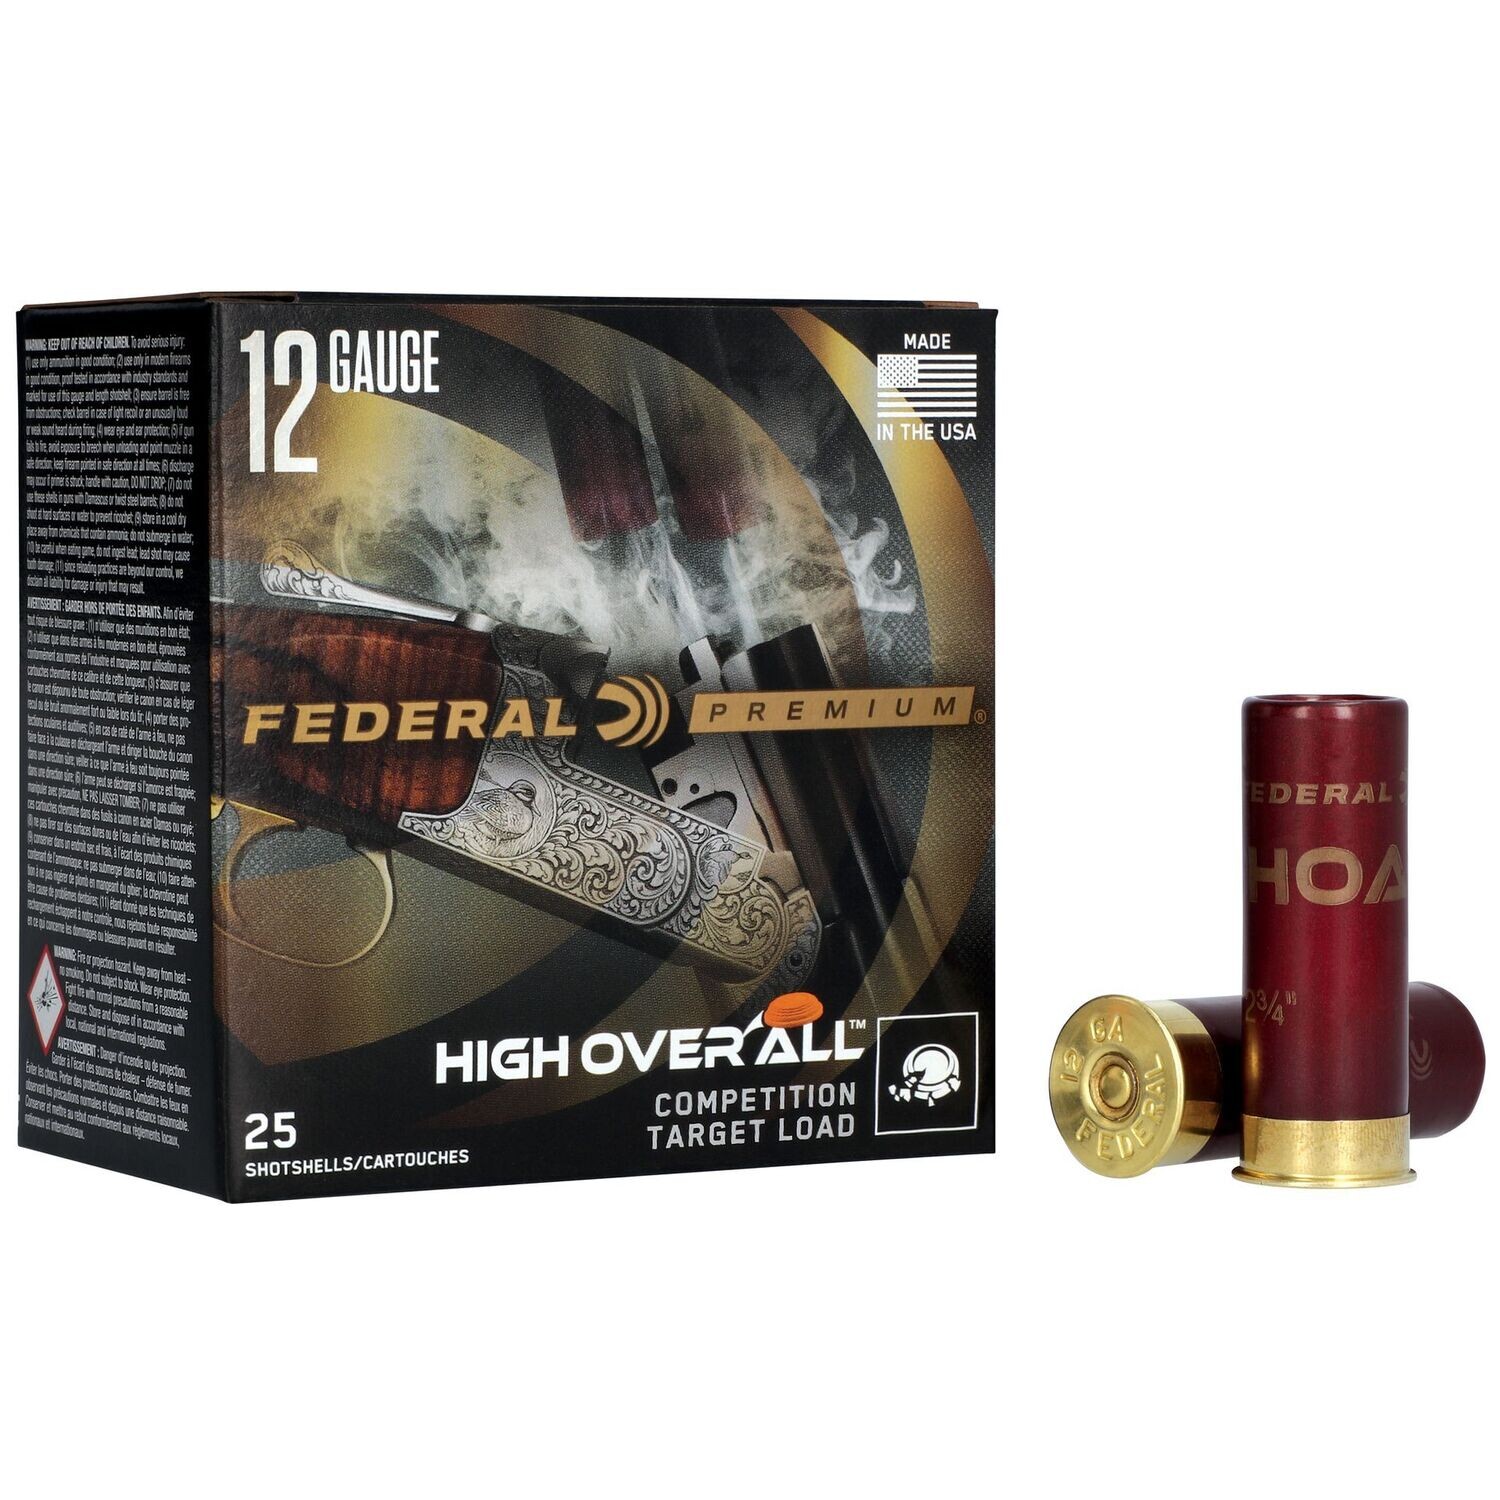 Federal, Premium, High Over All, Competition Target Load, 12 Gauge 2.75